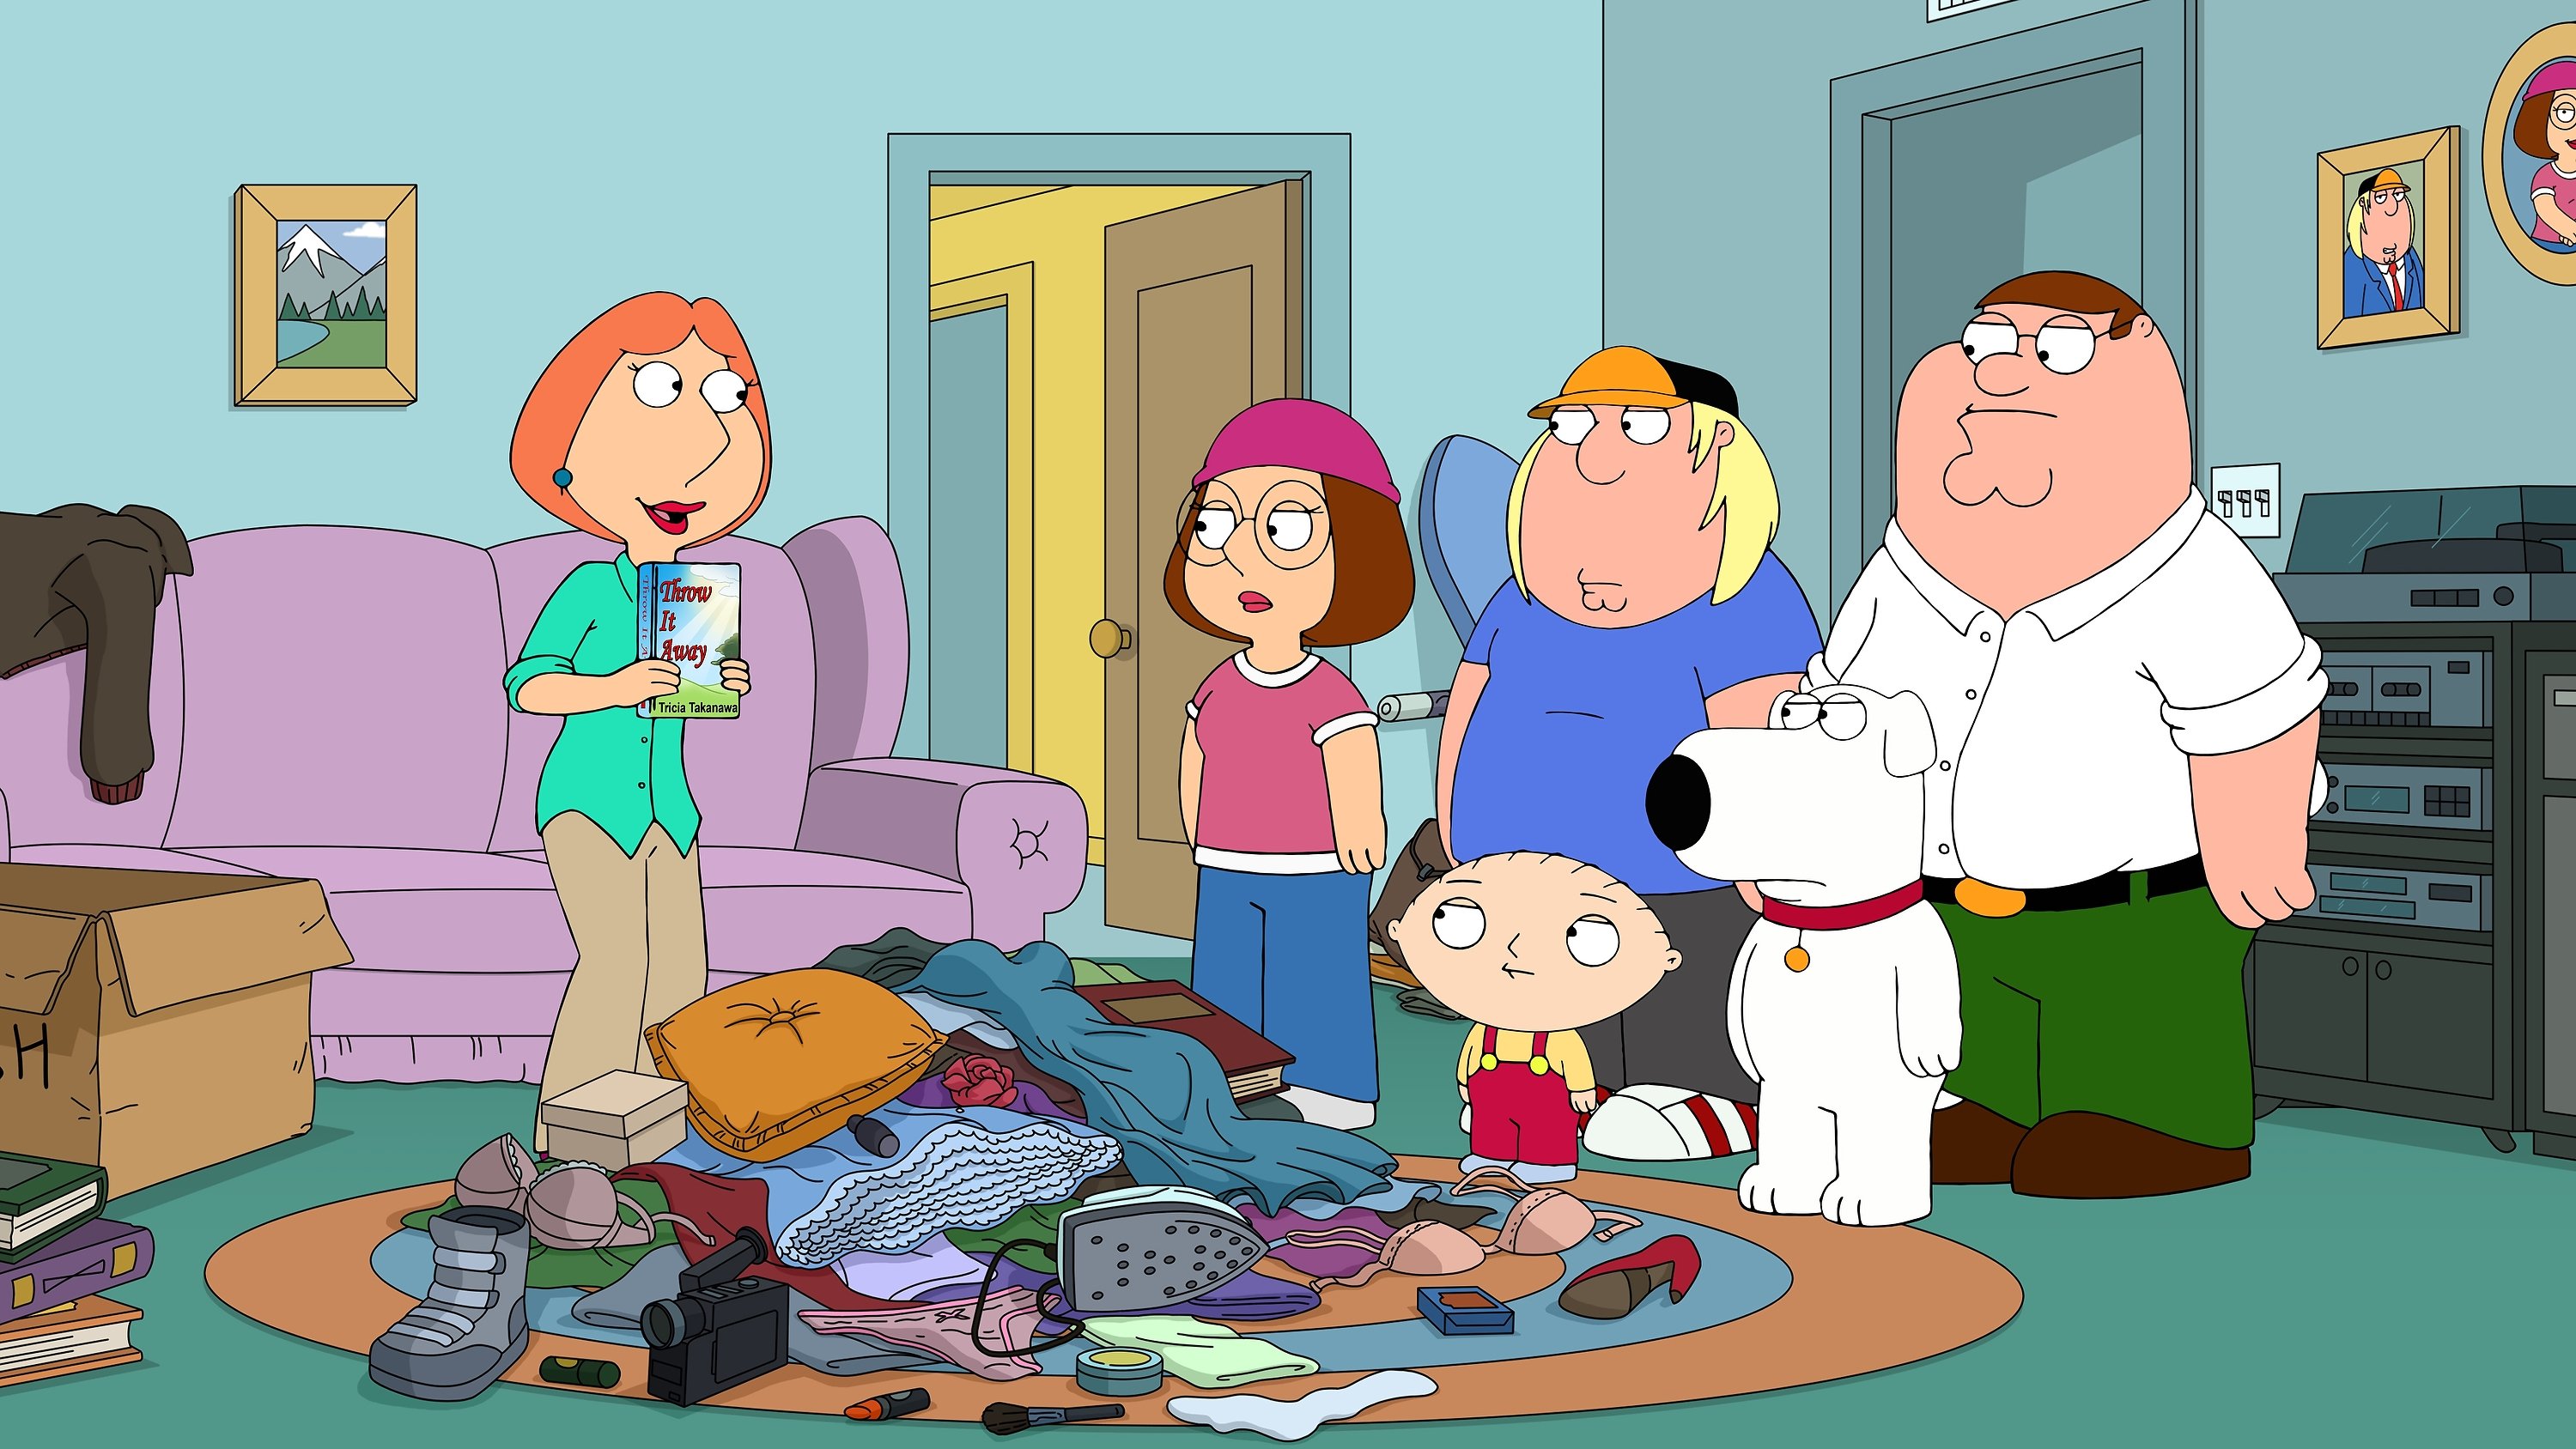 'Family Guy' the Griffin family in their living room helping Lois declutter the house.